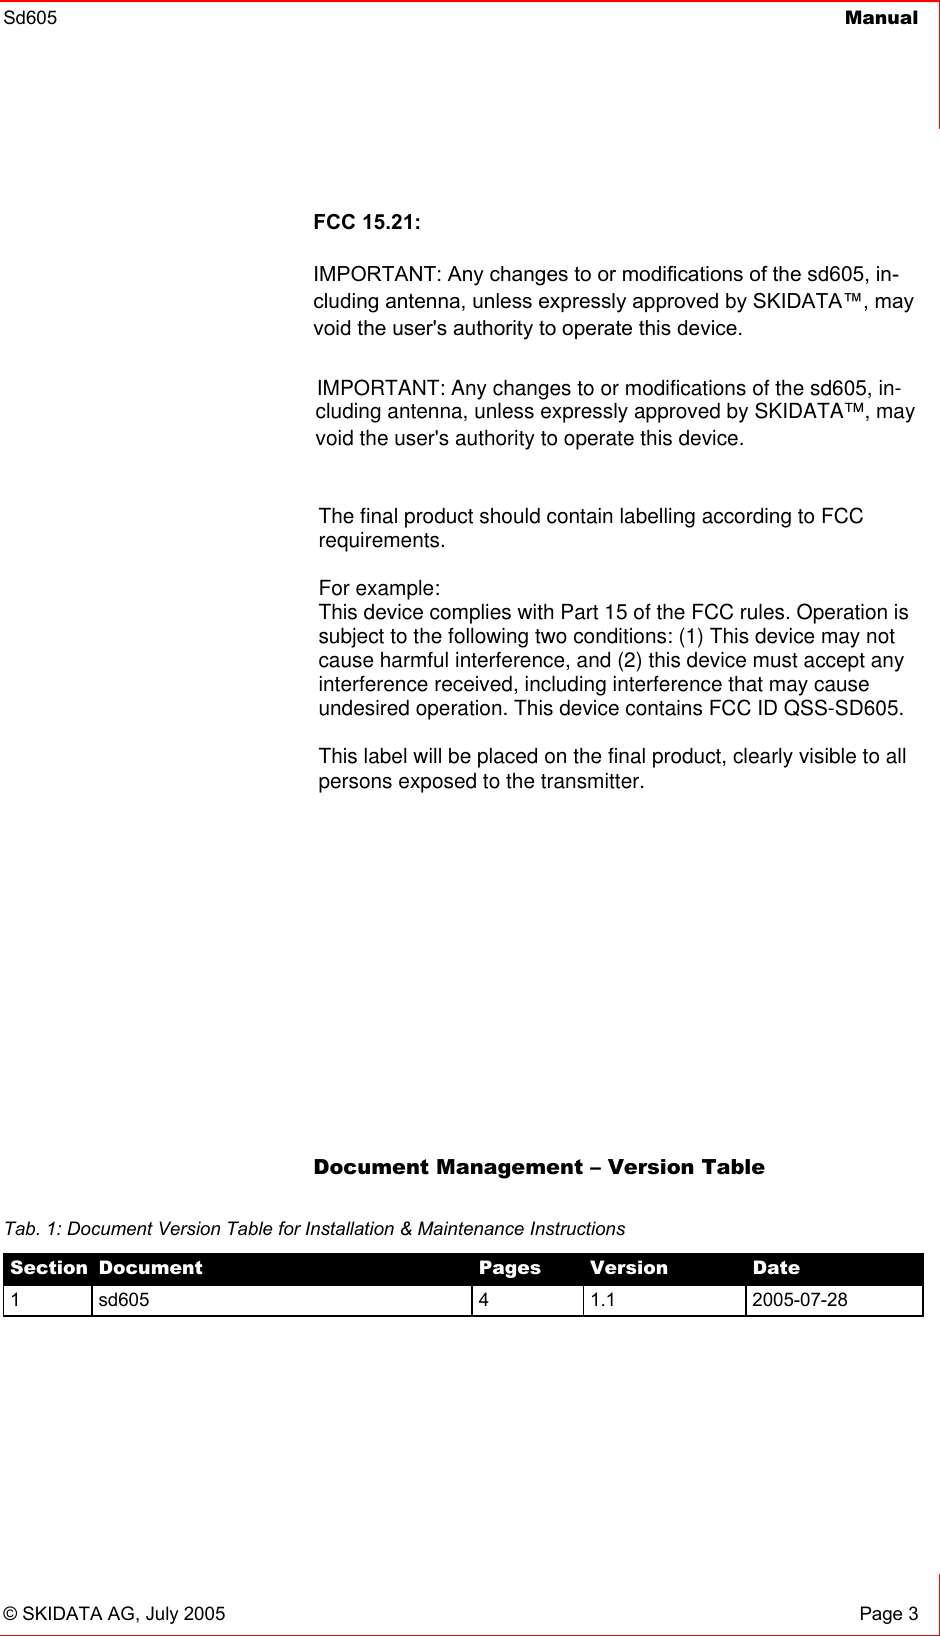 Sd605  Manual    © SKIDATA AG, July 2005  Page 3 FCC 15.21: IMPORTANT: Any changes to or modifications of the sd605, in-cluding antenna, unless expressly approved by SKIDATA™, may void the user&apos;s authority to operate this device.            Document Management – Version Table  Tab. 1: Document Version Table for Installation &amp; Maintenance Instructions Section  Document  Pages  Version  Date 1 sd605  4  1.1  2005-07-28 IMPORTANT: Any changes to or modifications of the sd605, in-cluding antenna, unless expressly approved by SKIDATA™, may void the user&apos;s authority to operate this device. The final product should contain labelling according to FCCrequirements.For example:This device complies with Part 15 of the FCC rules. Operation issubject to the following two conditions: (1) This device may notcause harmful interference, and (2) this device must accept anyinterference received, including interference that may causeundesired operation. This device contains FCC ID QSS-SD605.This label will be placed on the final product, clearly visible to allpersons exposed to the transmitter.